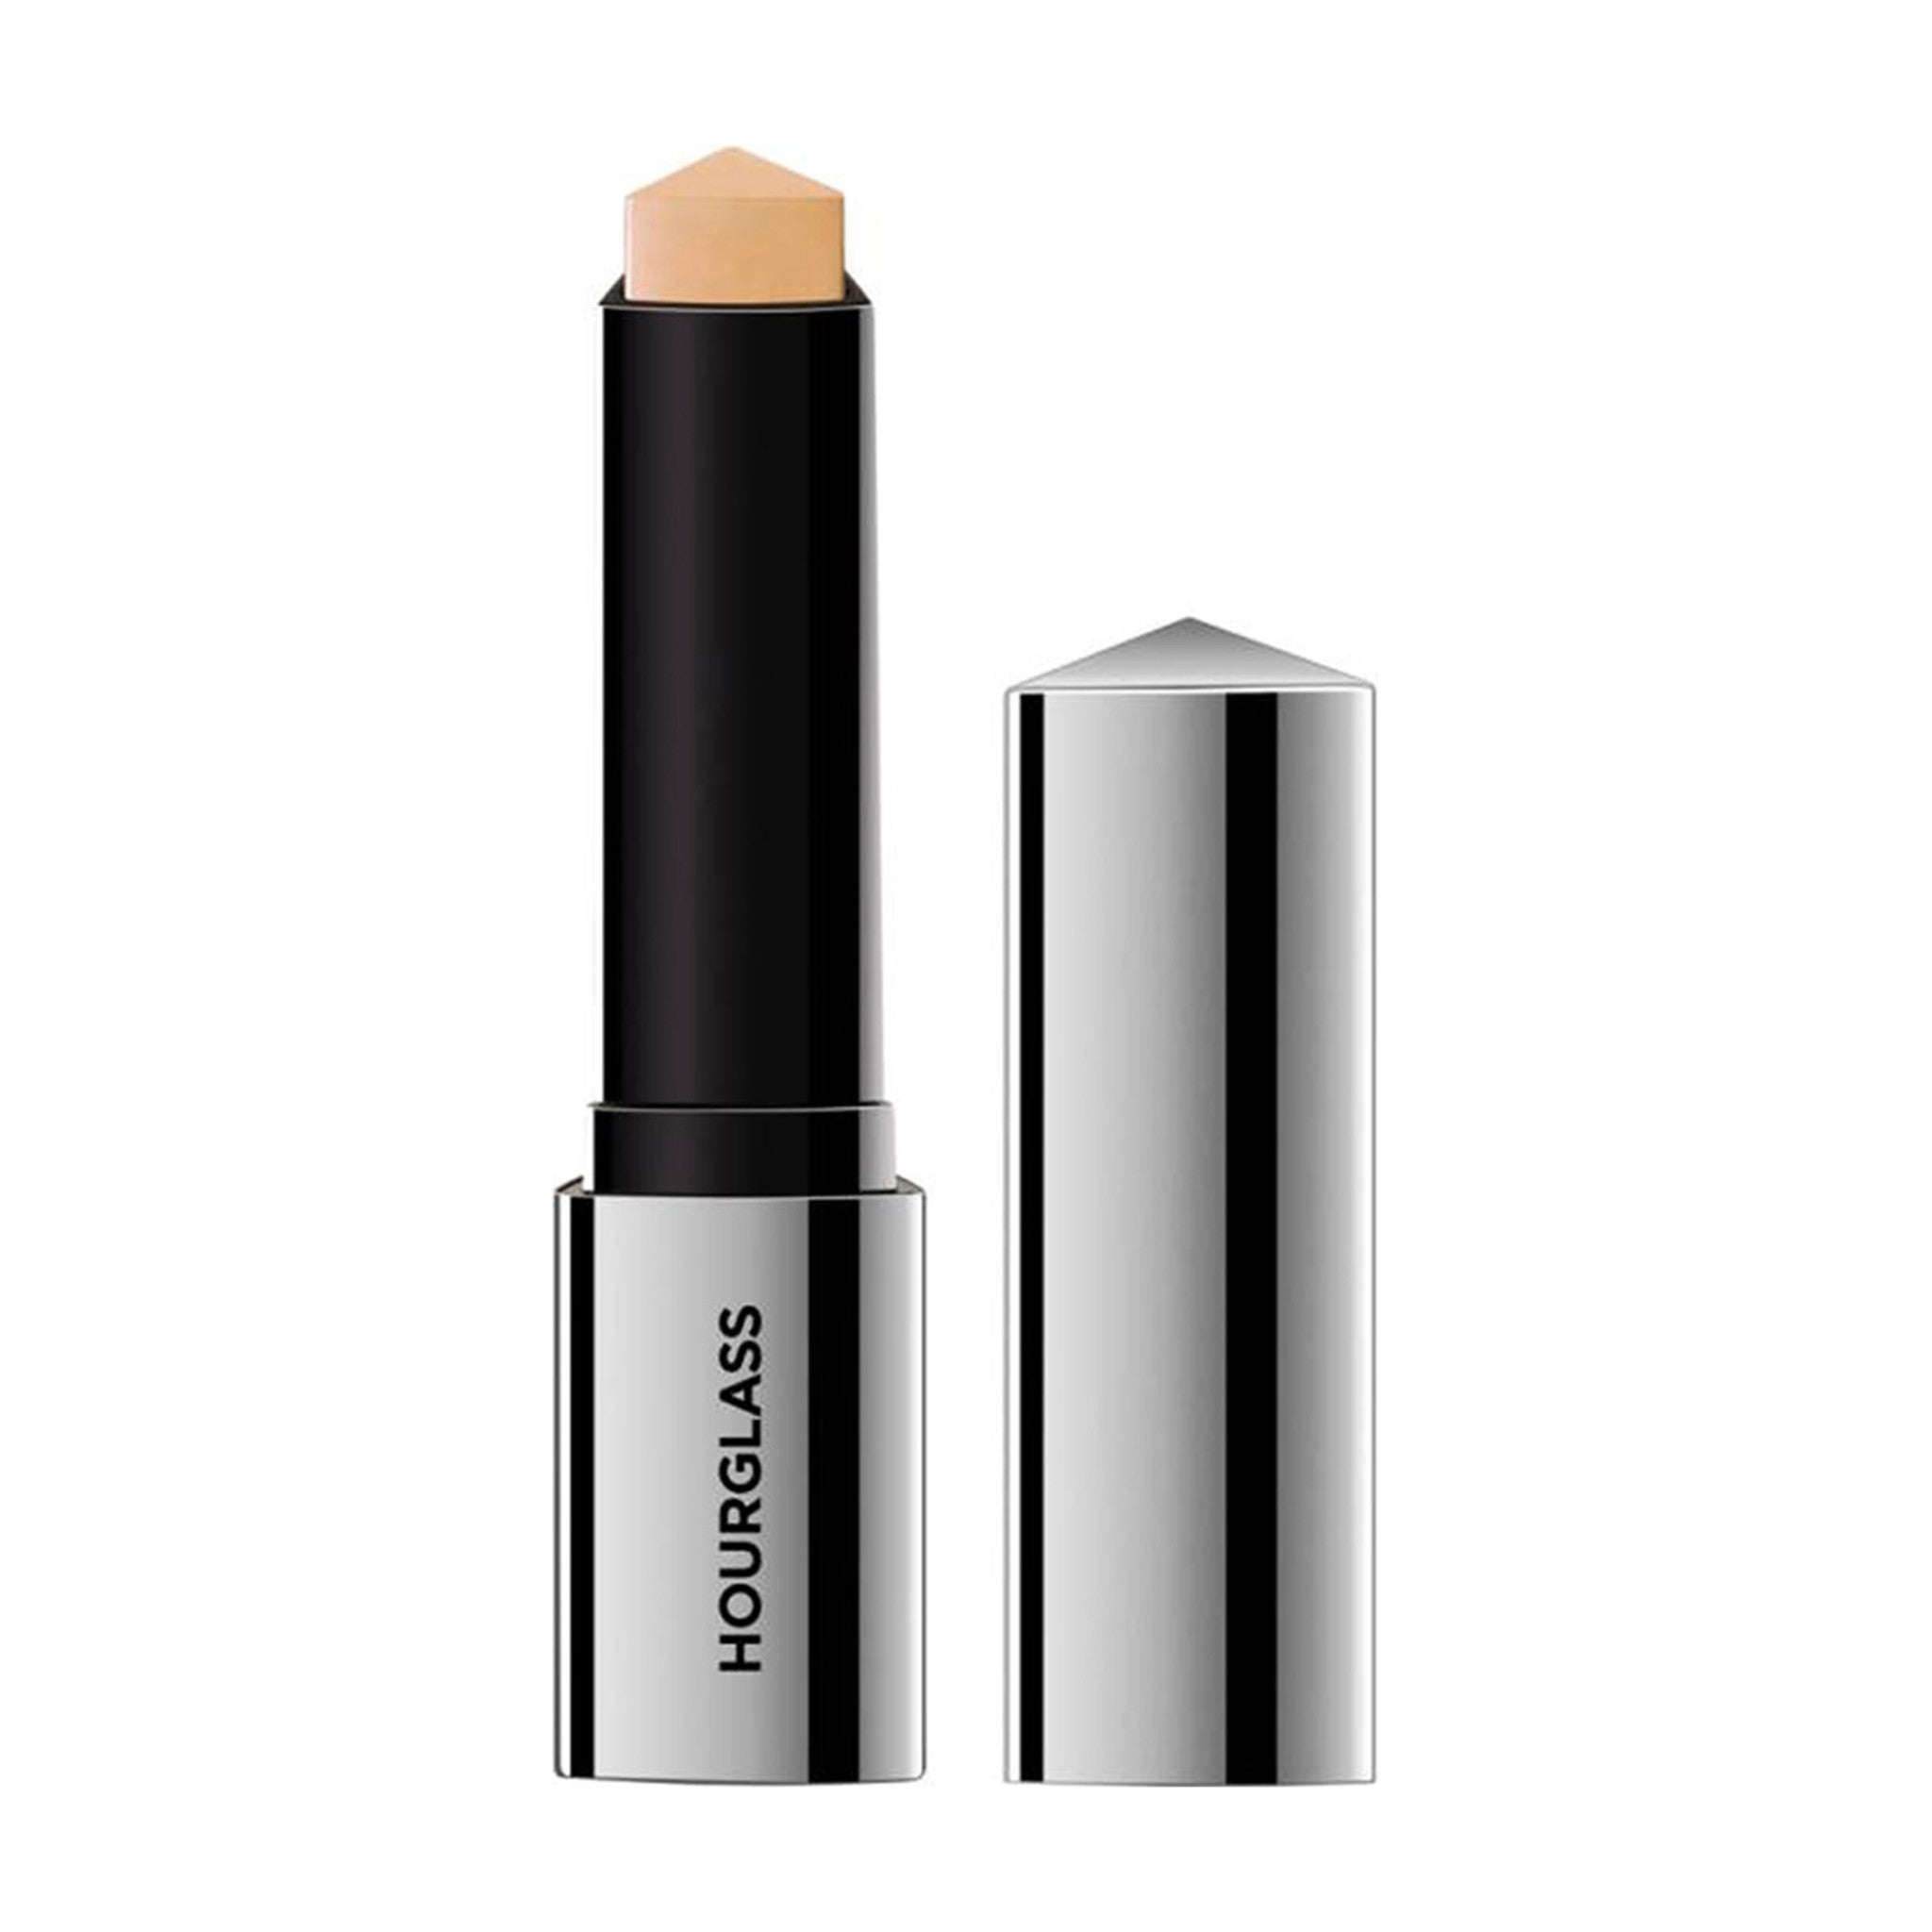 Hourglass Vanish Flash Highlighting Stick Color/Shade variant: Gold main image.